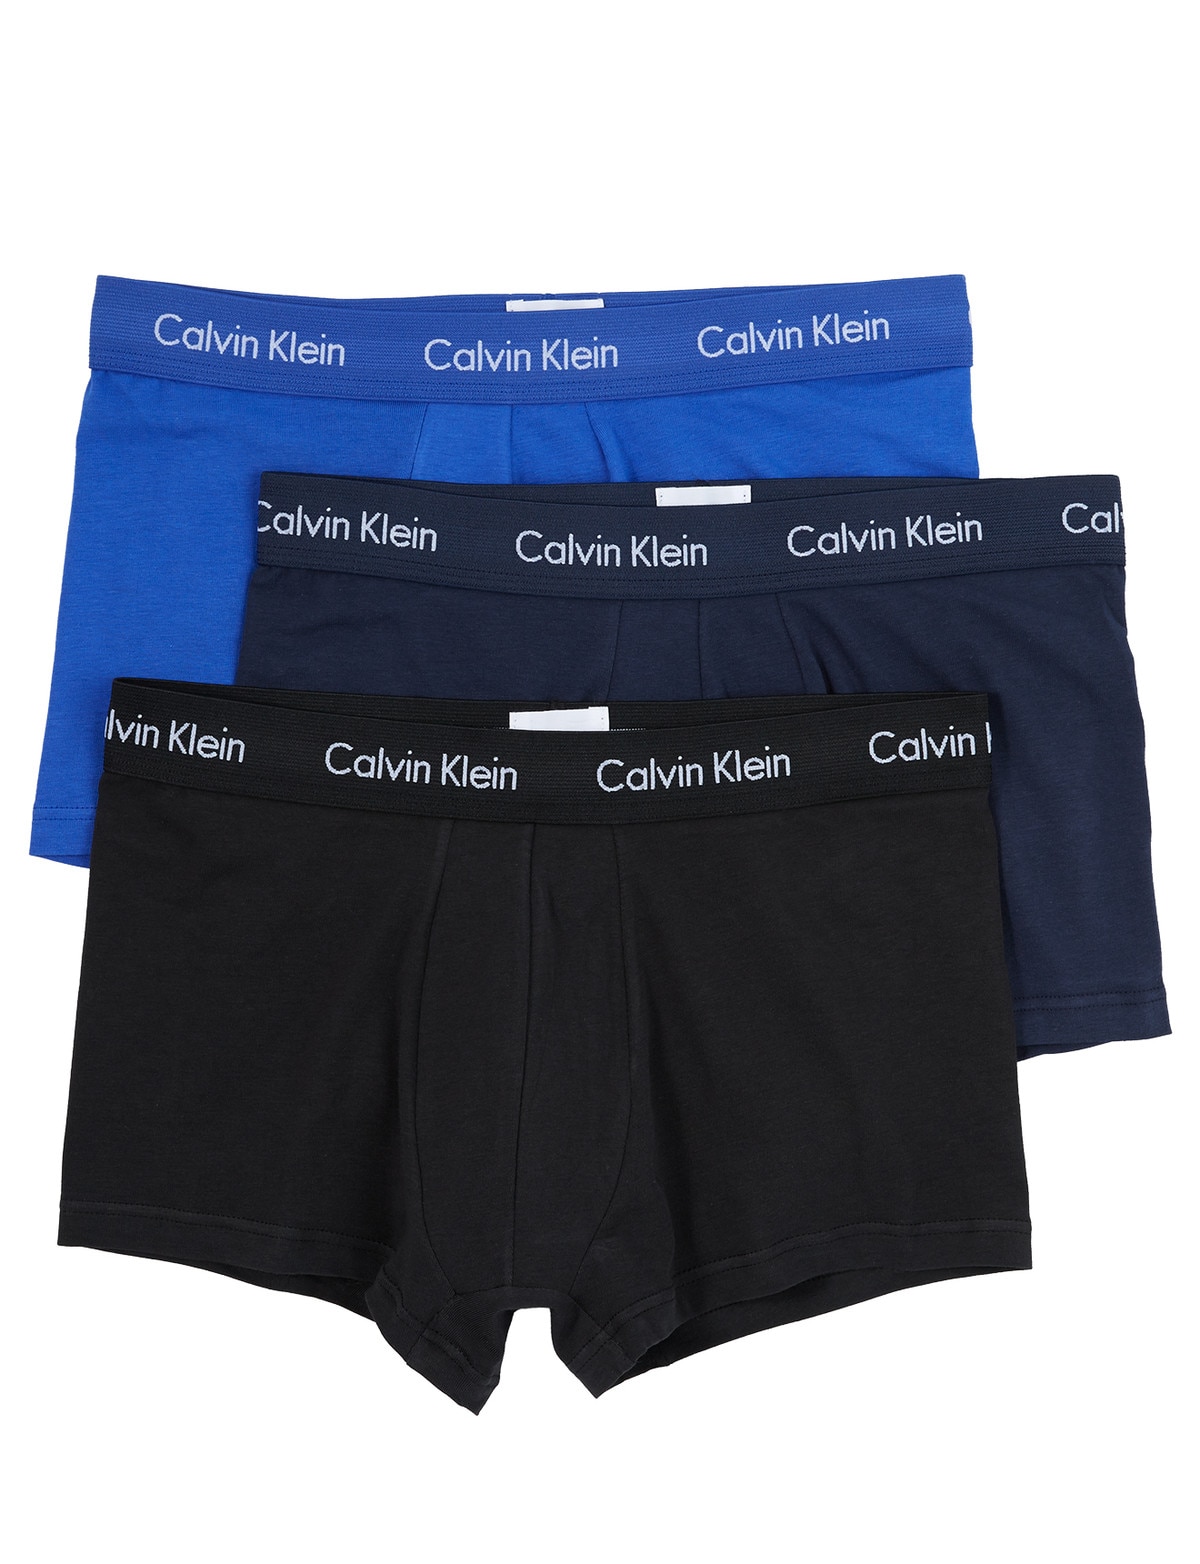 Calvin Klein Low Rise Cotton Stretch Trunks, Pack of 3, Black at